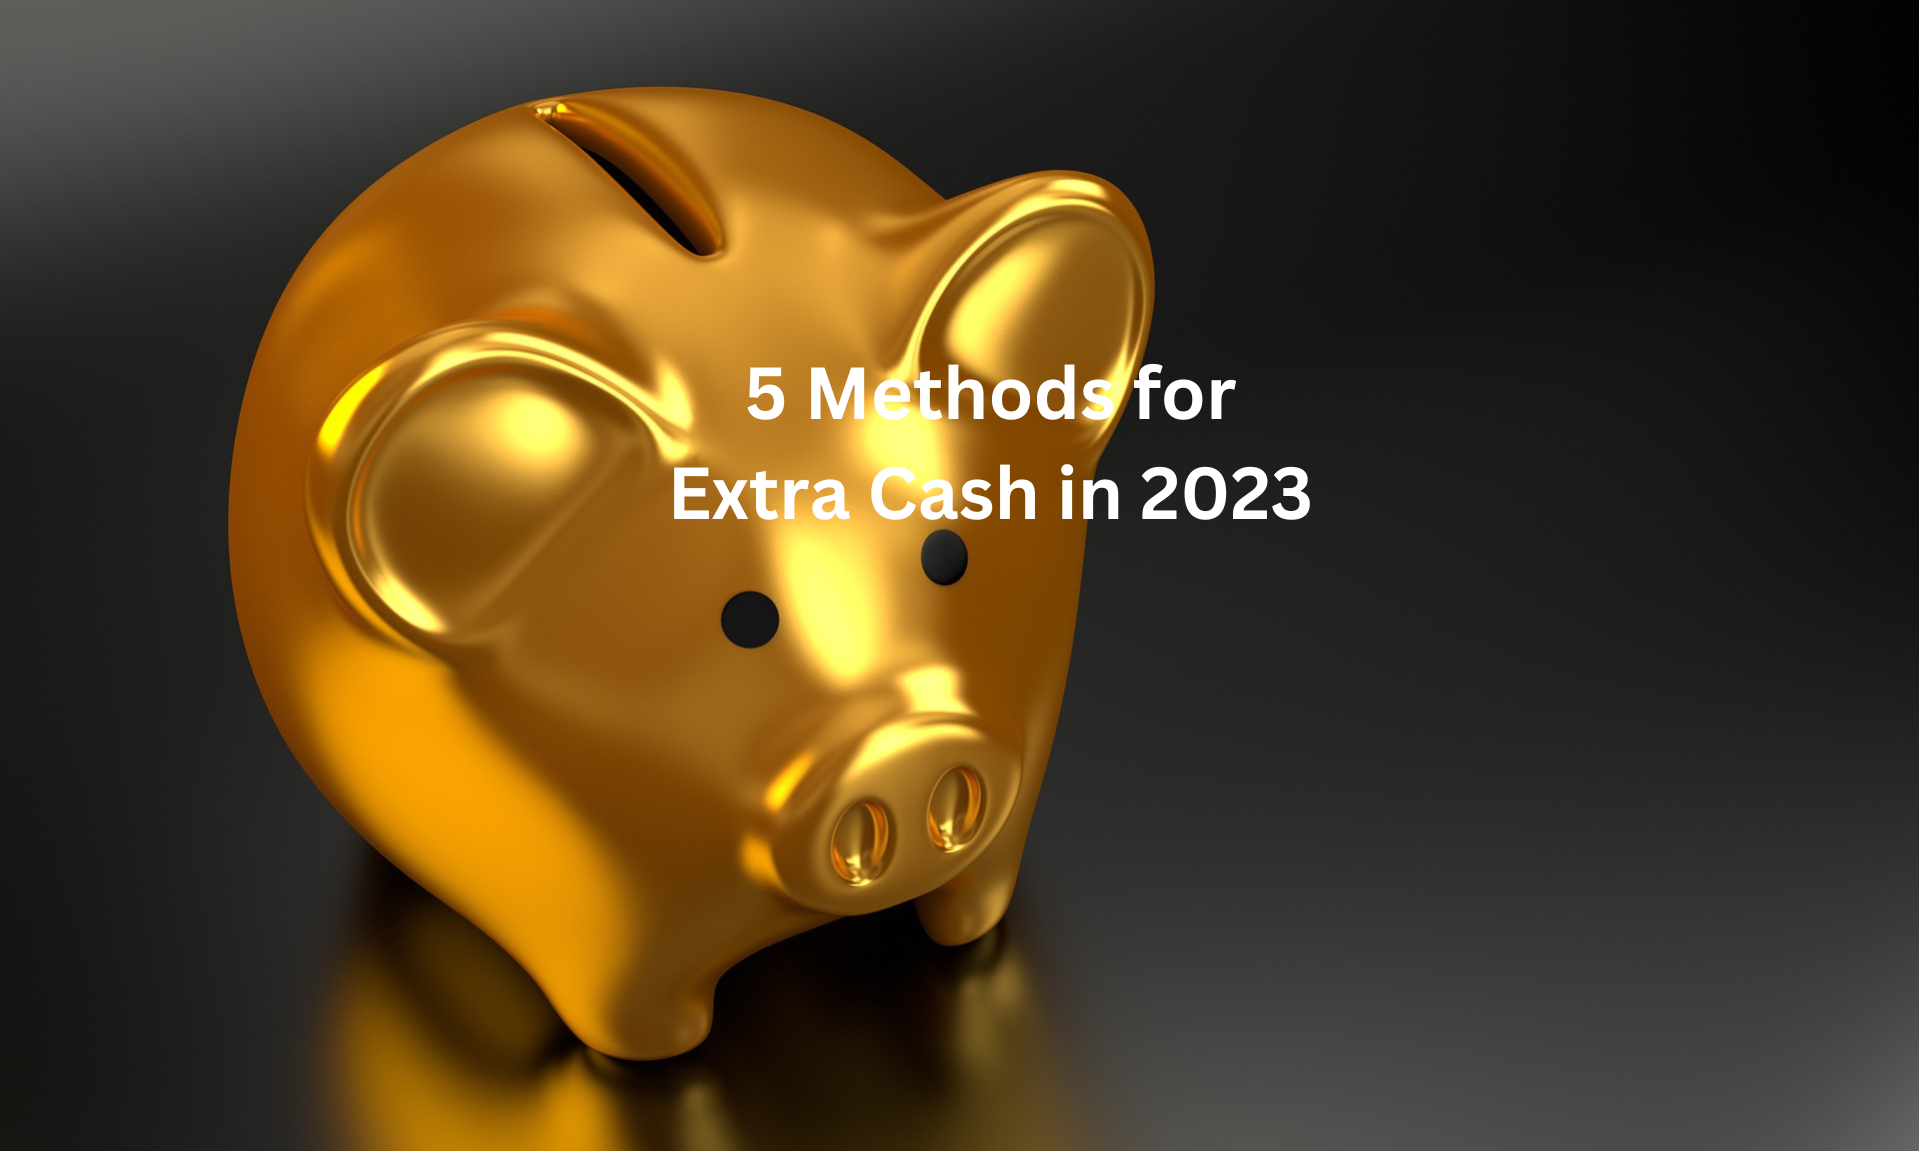 5 Methods for Extra Cash in 2023